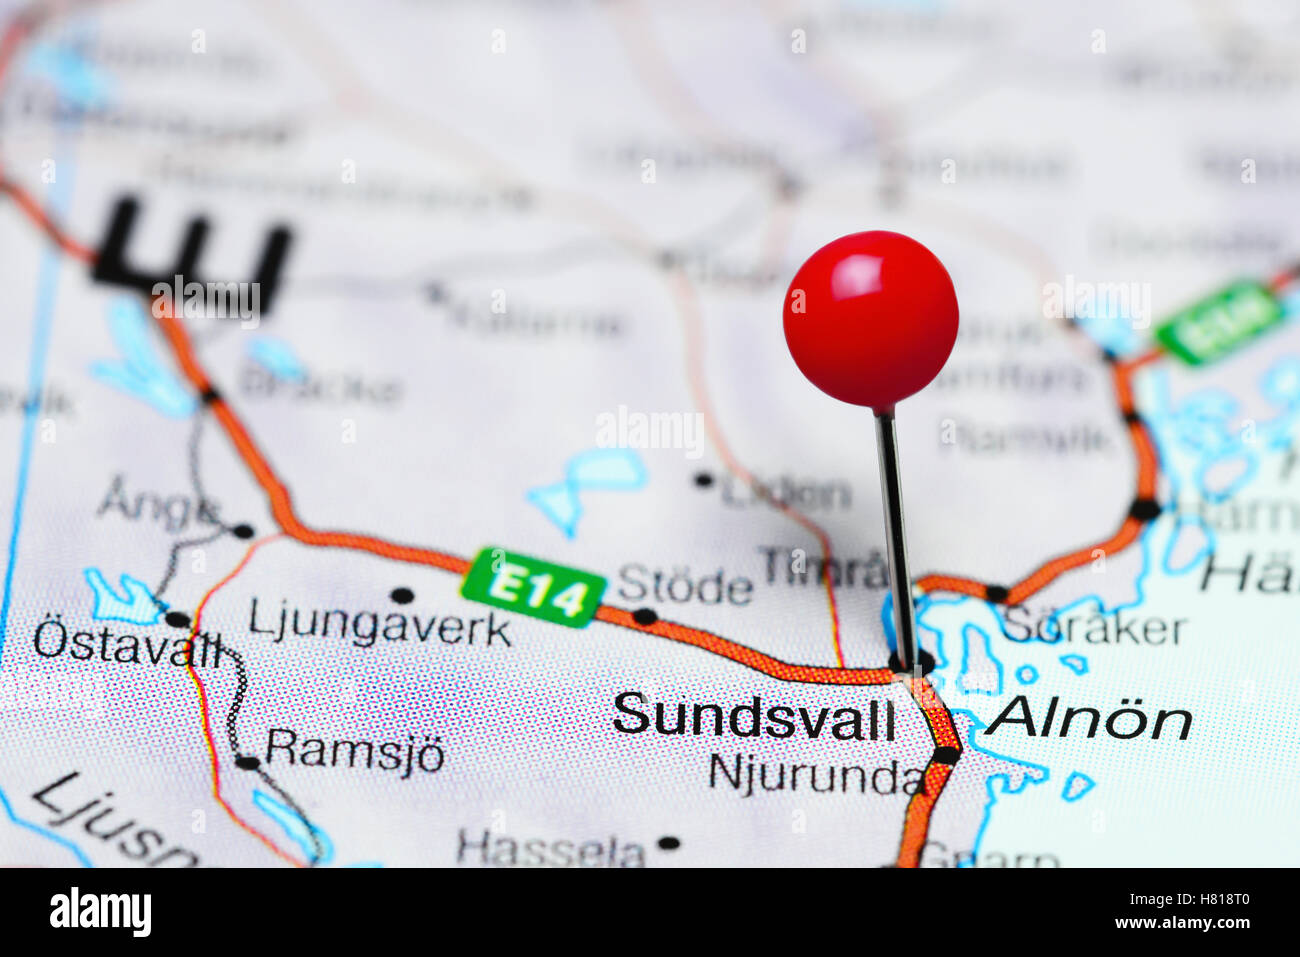 Sundsvall pinned on a map of Sweden Stock Photo